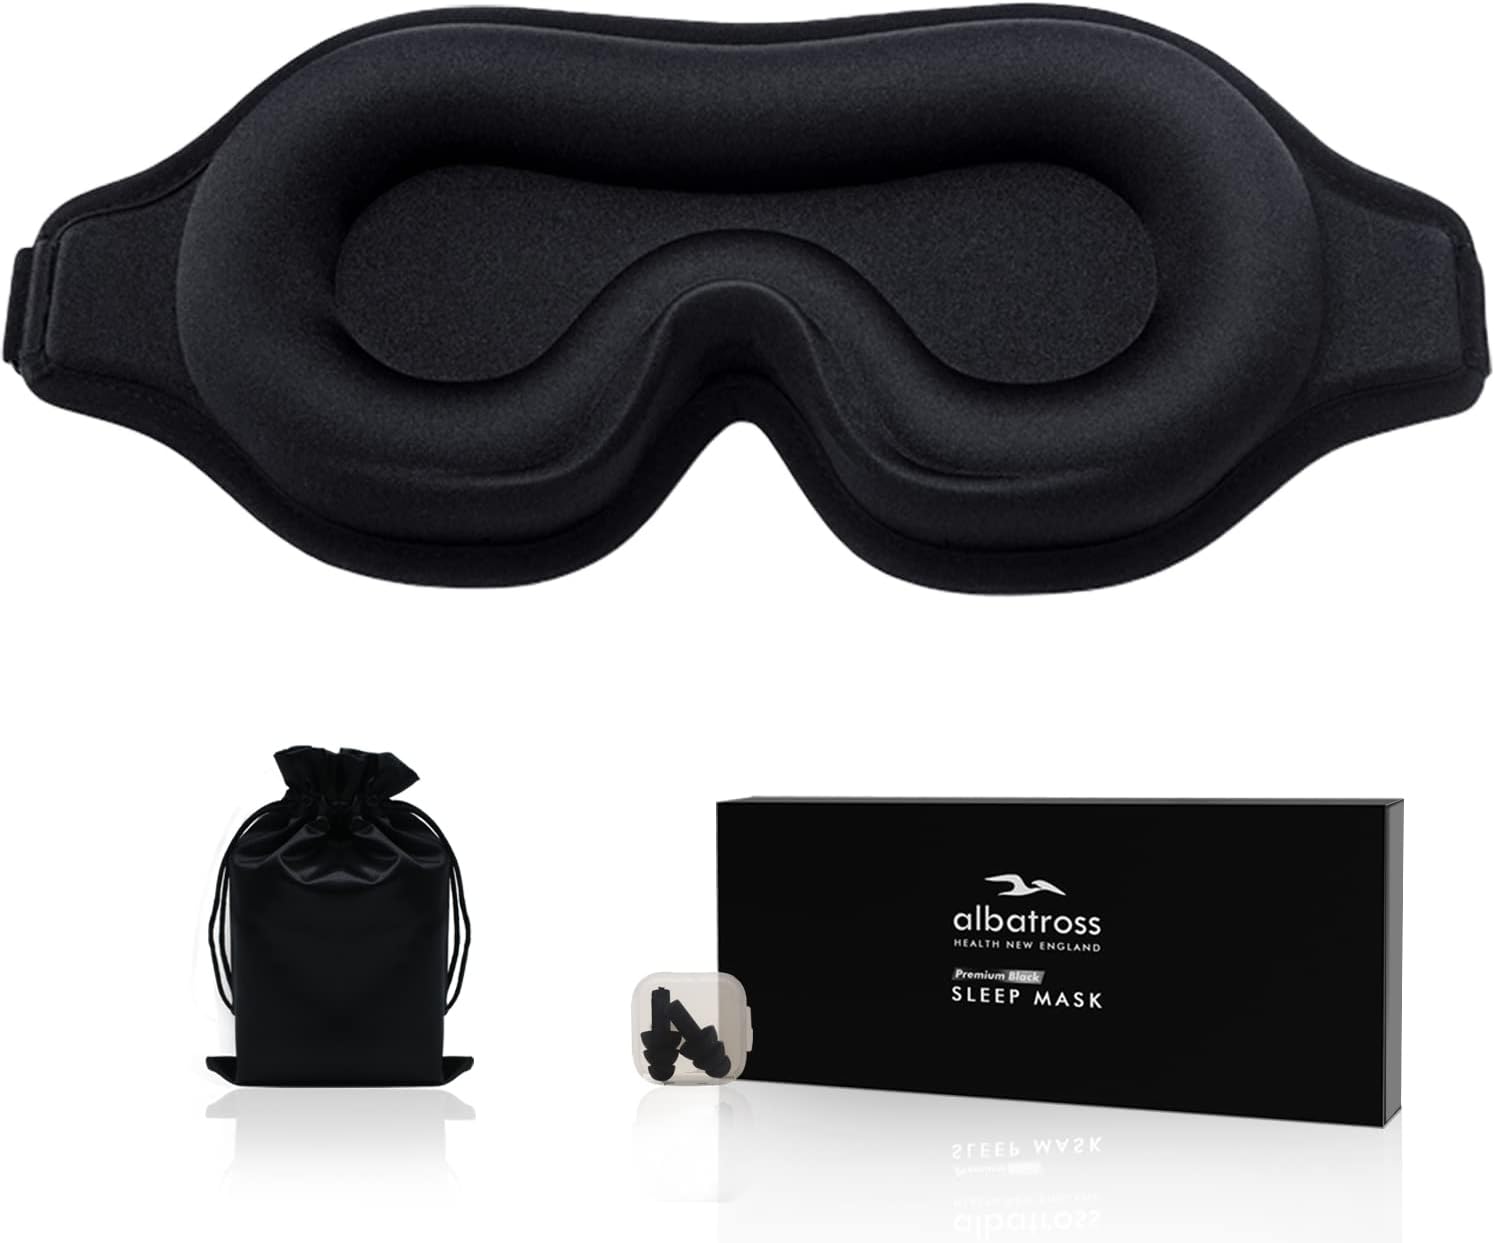 Albatross Health New England Sleep Mask for Men Women, Upgraded 3D Contoured Cup Eye mask with Adjustable Strap, Breathable  Soft for Sleeping, Yoga, Traveling (Black)